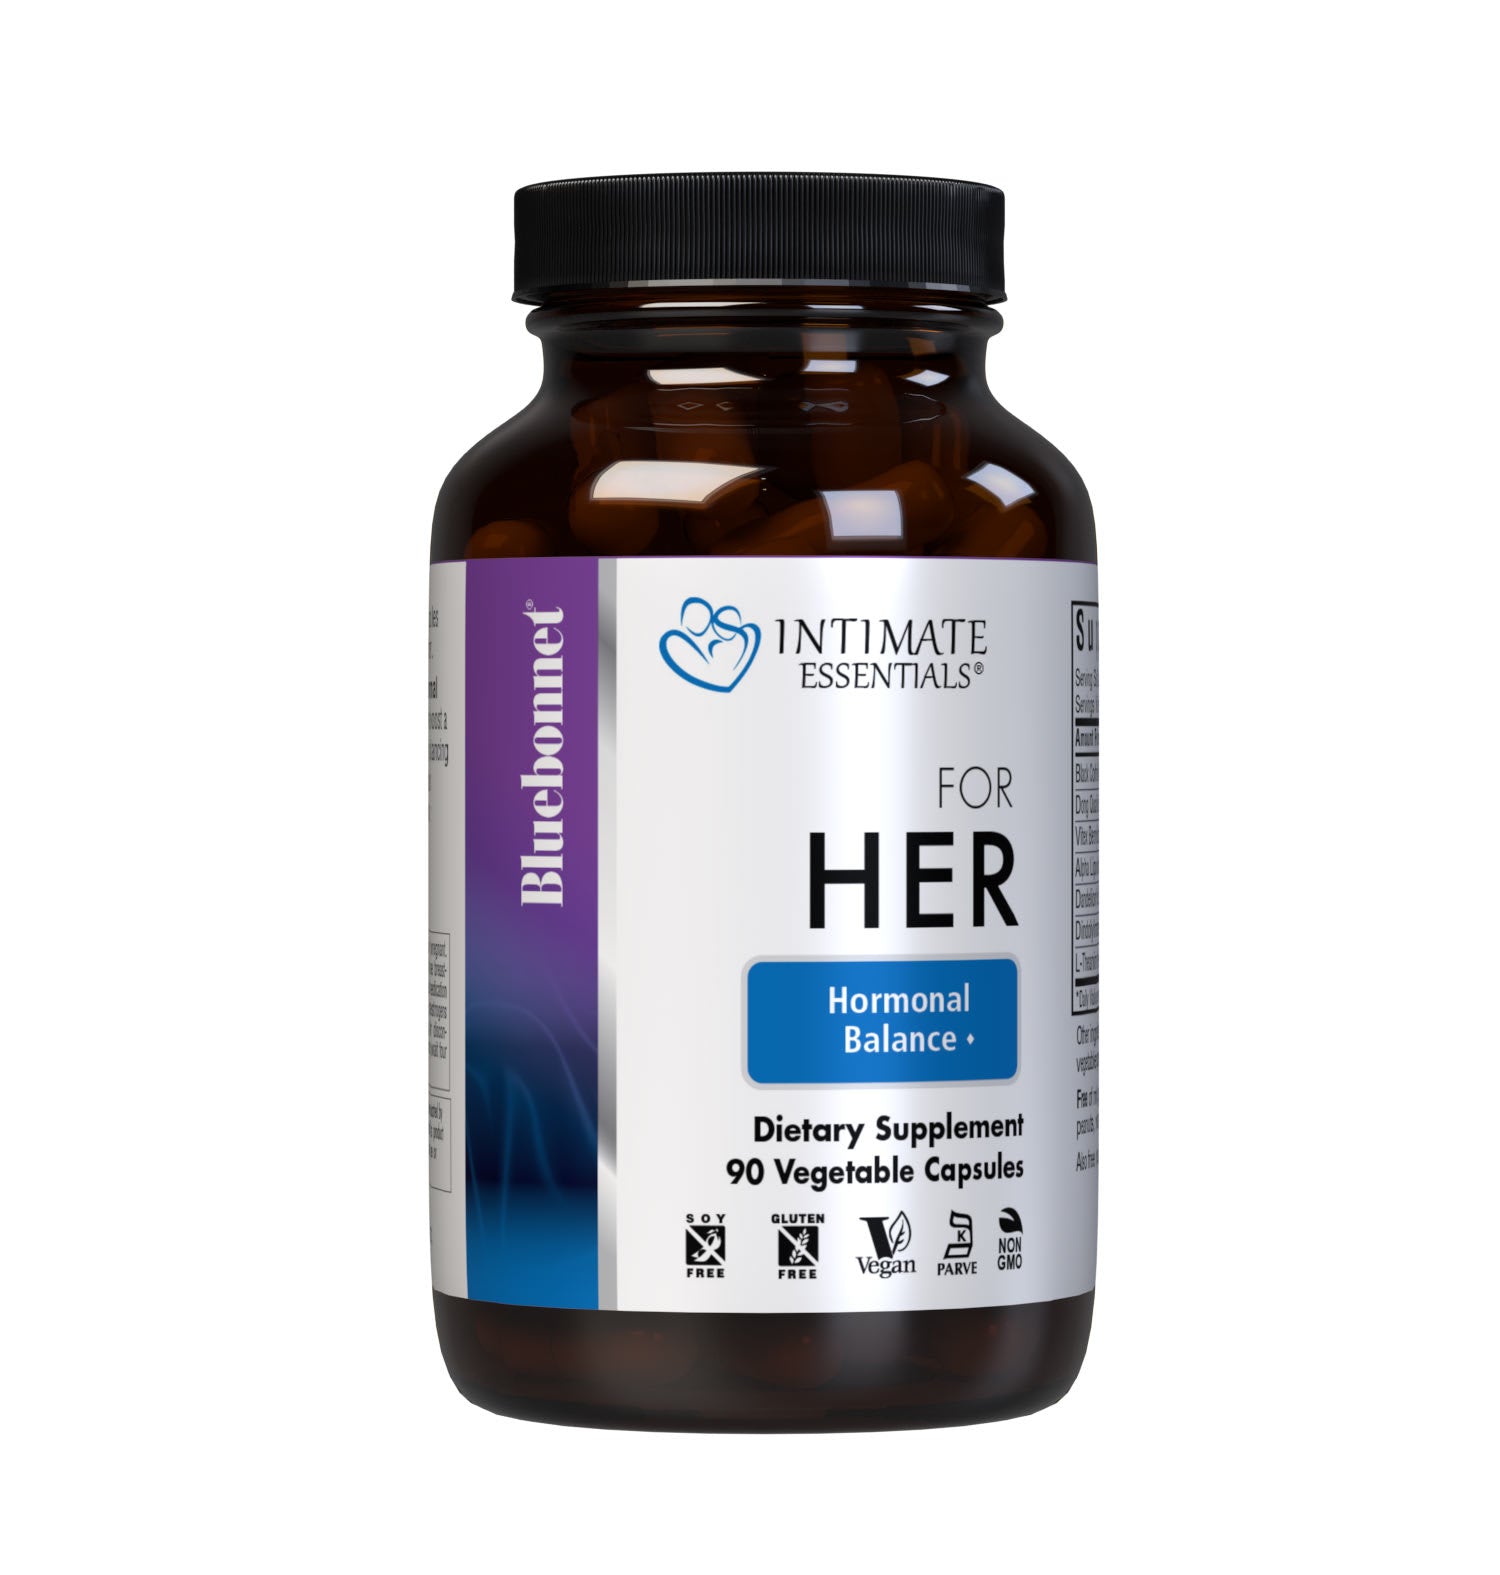 Bluebonnet’s Intimate Essentials® For Her Hormonal Balance Vegetable Capsules are specially formulated to help boost a woman’s sexual energy and youthful vibrance by balancing hormones during PMS and menopause. #size_90 count